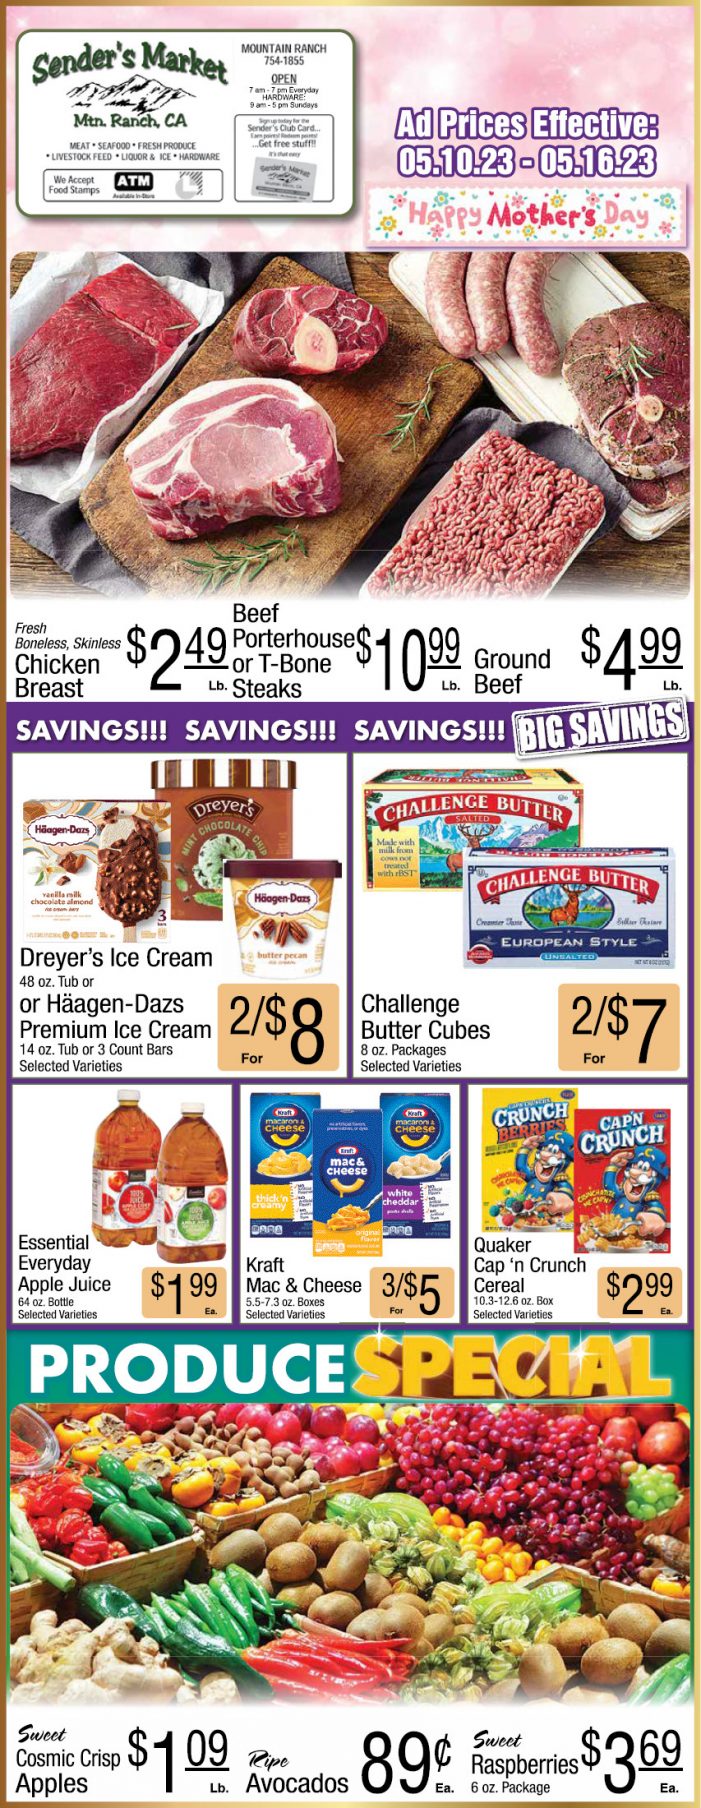 Sender’s Market Weekly Ad & Grocery Specials Through May 16th! Shop Local & Save!!